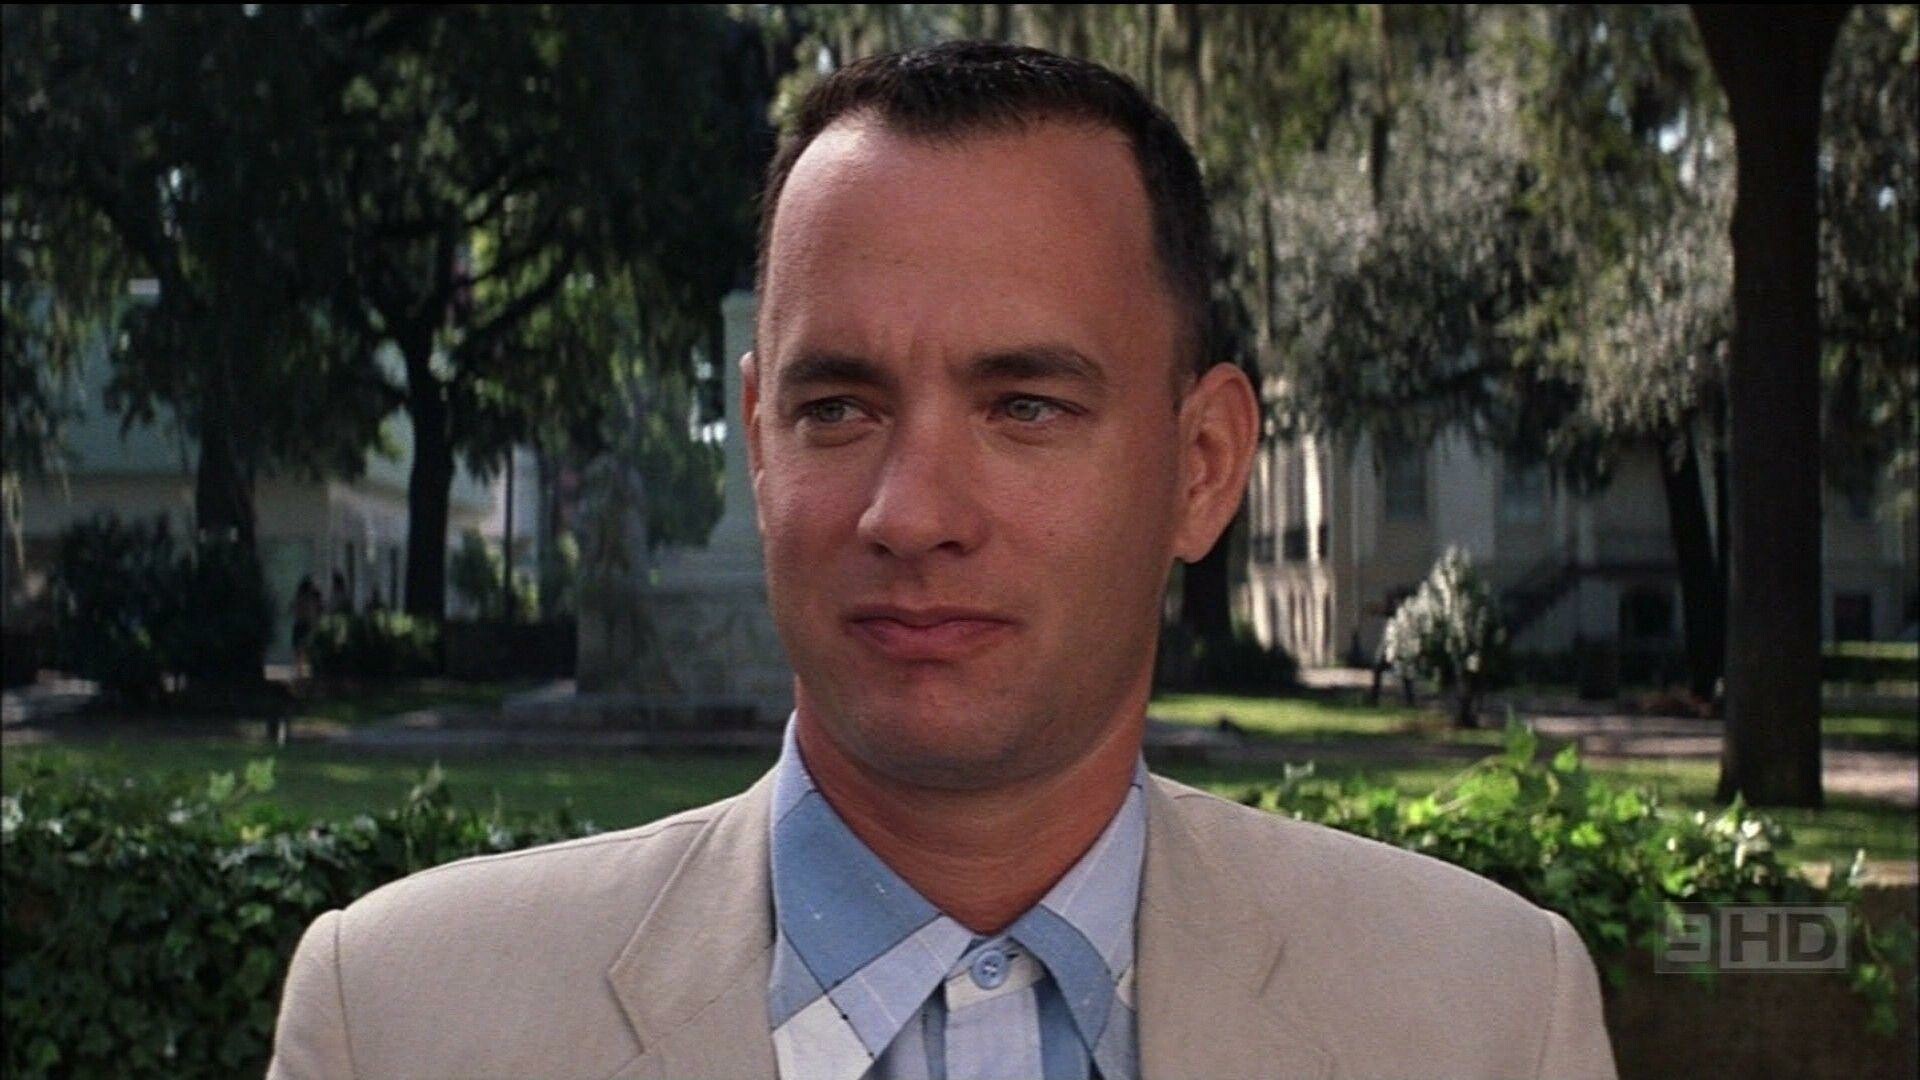 Forrest Gump: A gentle, friendly man navigates through the major events of the 1960s and '70s. 1920x1080 Full HD Wallpaper.